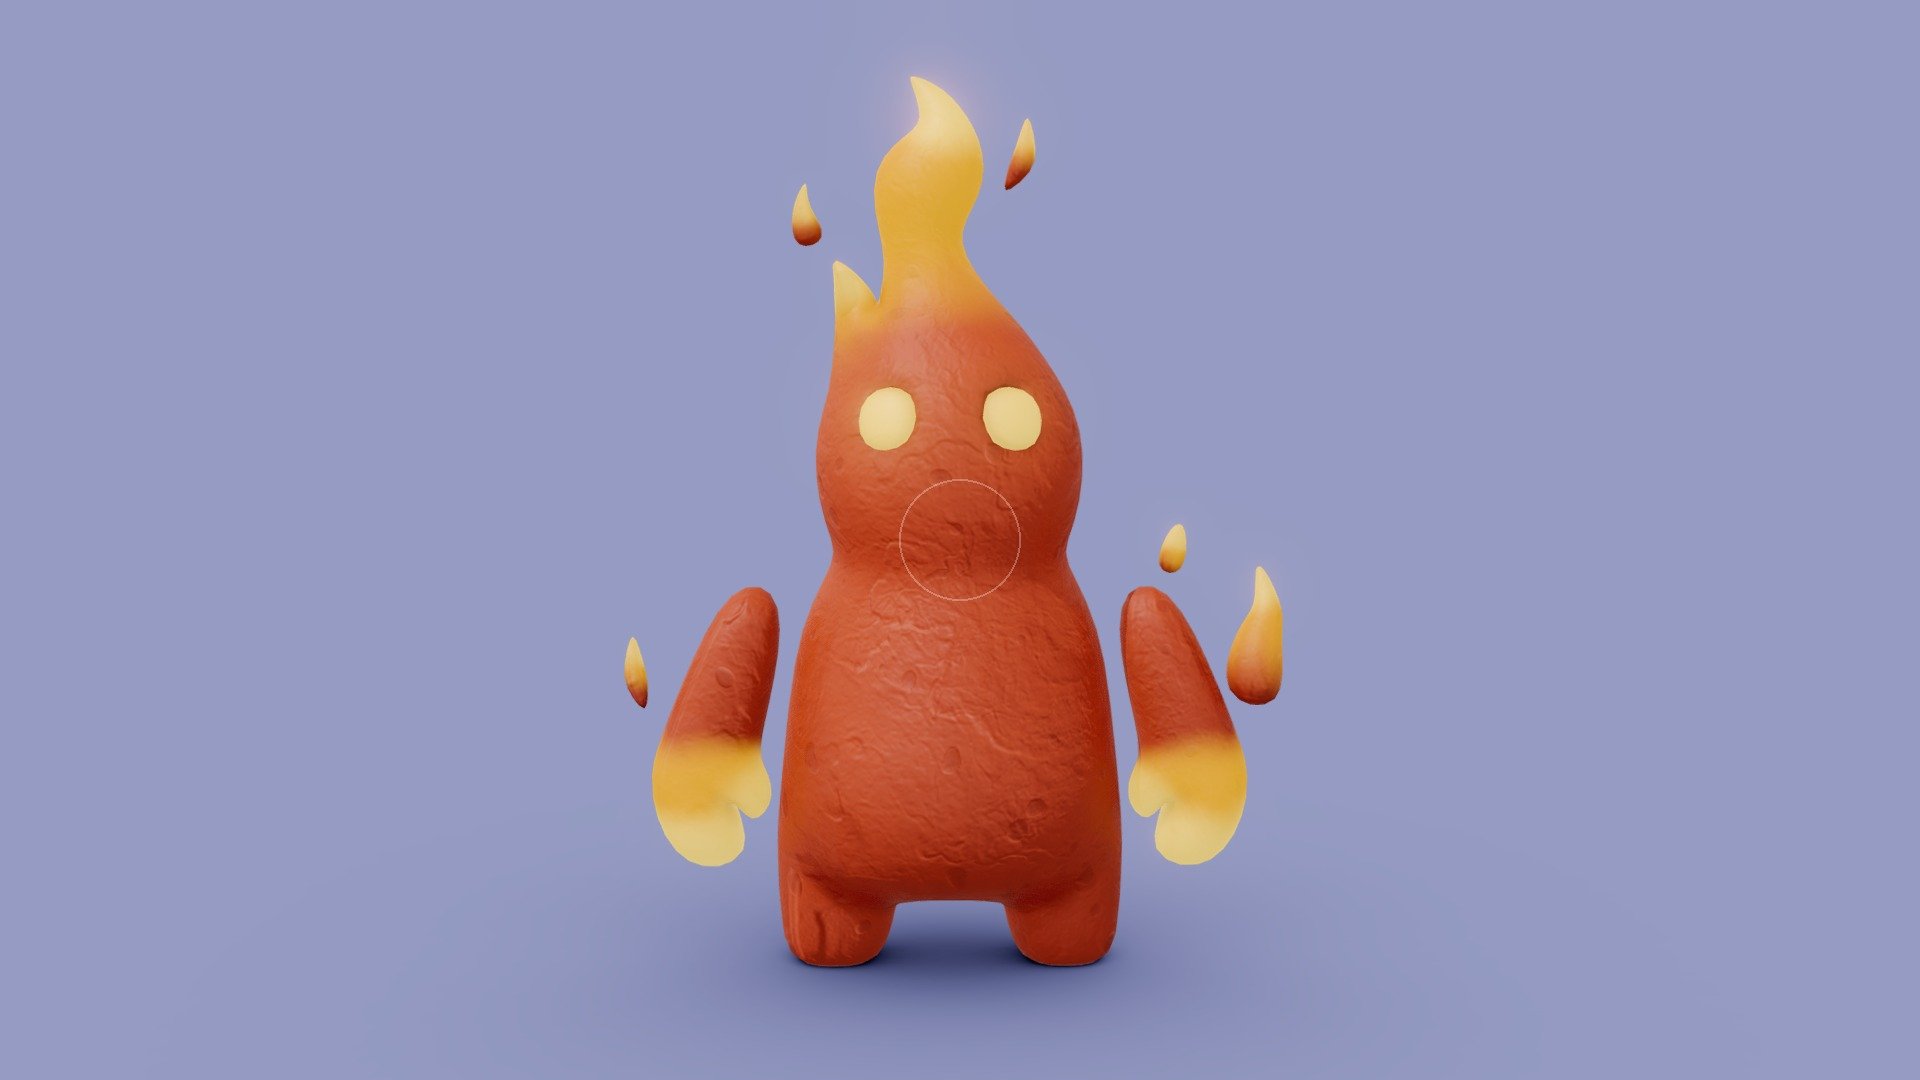 Fire Monster for your renders and games

Textures:

Diffuse color, Roughness, Normal, Emission

All textures are 2K

Files Formats:

Blend

Fbx

Obj - Fire Monster - Buy Royalty Free 3D model by Vanessa Araújo (@vanessa3d) 3d model